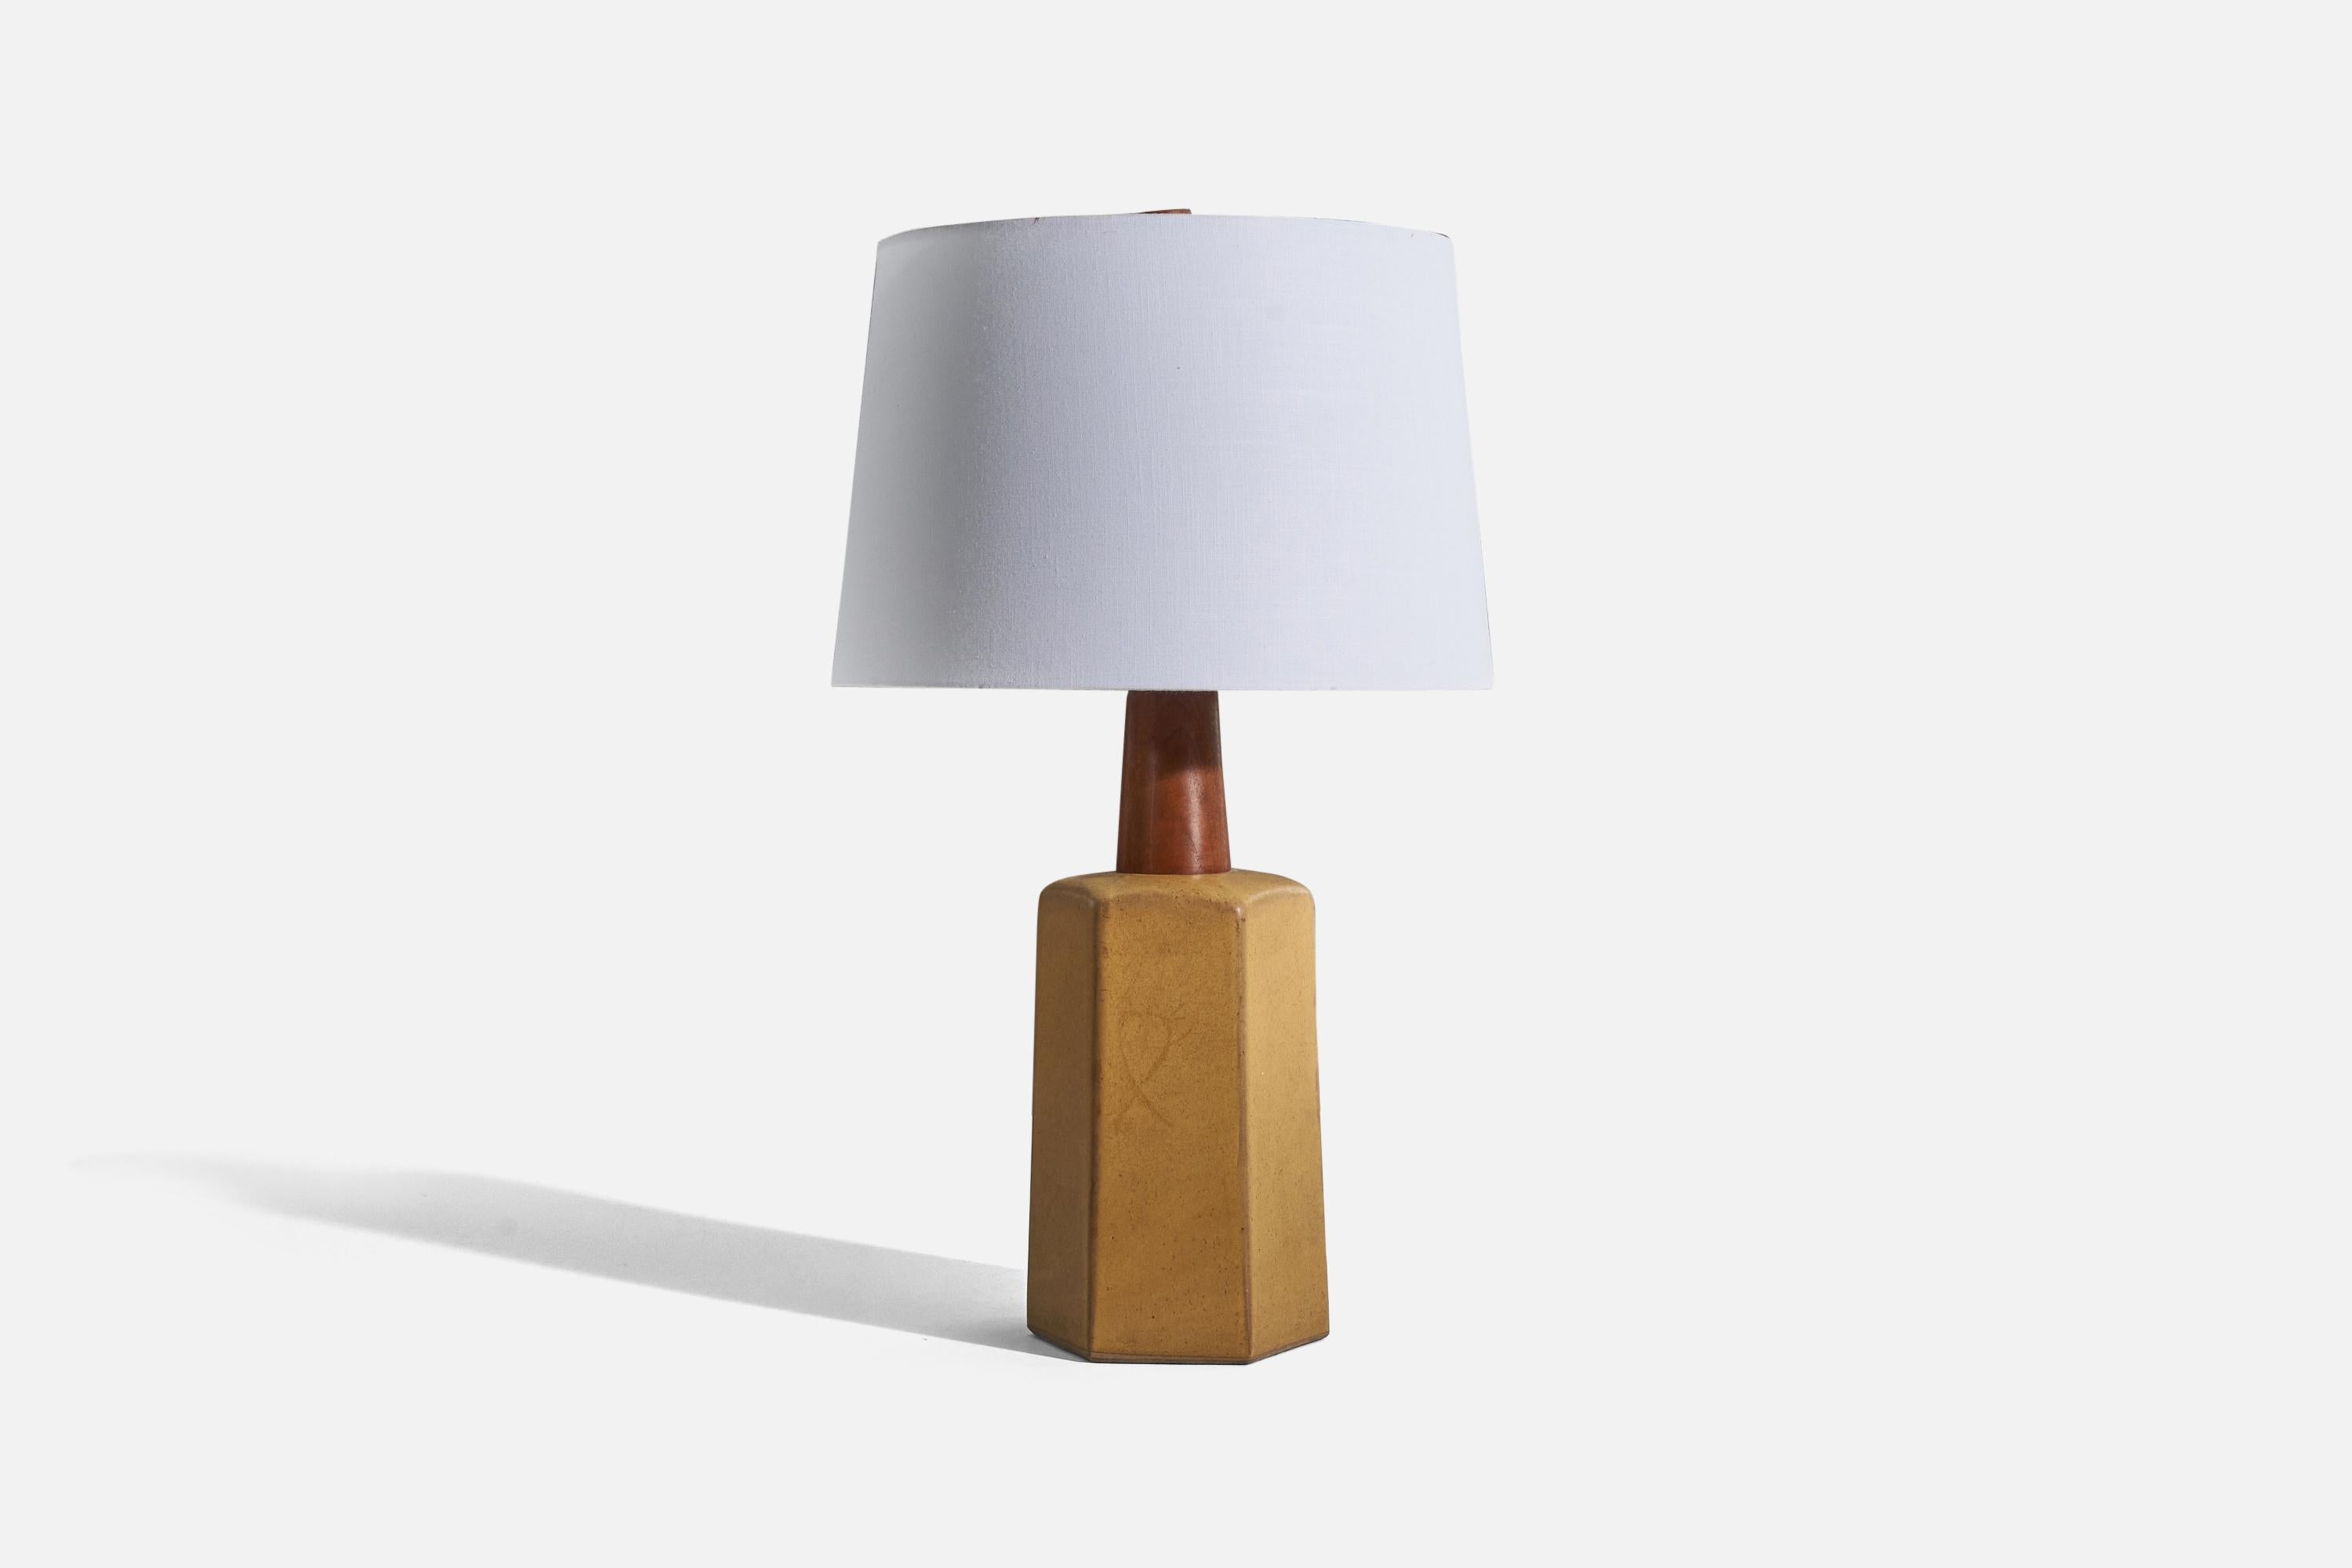 A ceramic and wood table lamp, designed by husband and wife duo Jane & Gordon Martz, produced by Marshall Studios, Indianapolis, United States, 1960s.

Sold without lampshade. 
Dimensions of lamp (inches) : (H 18 x W 7.12 x D 6)
Dimensions shade